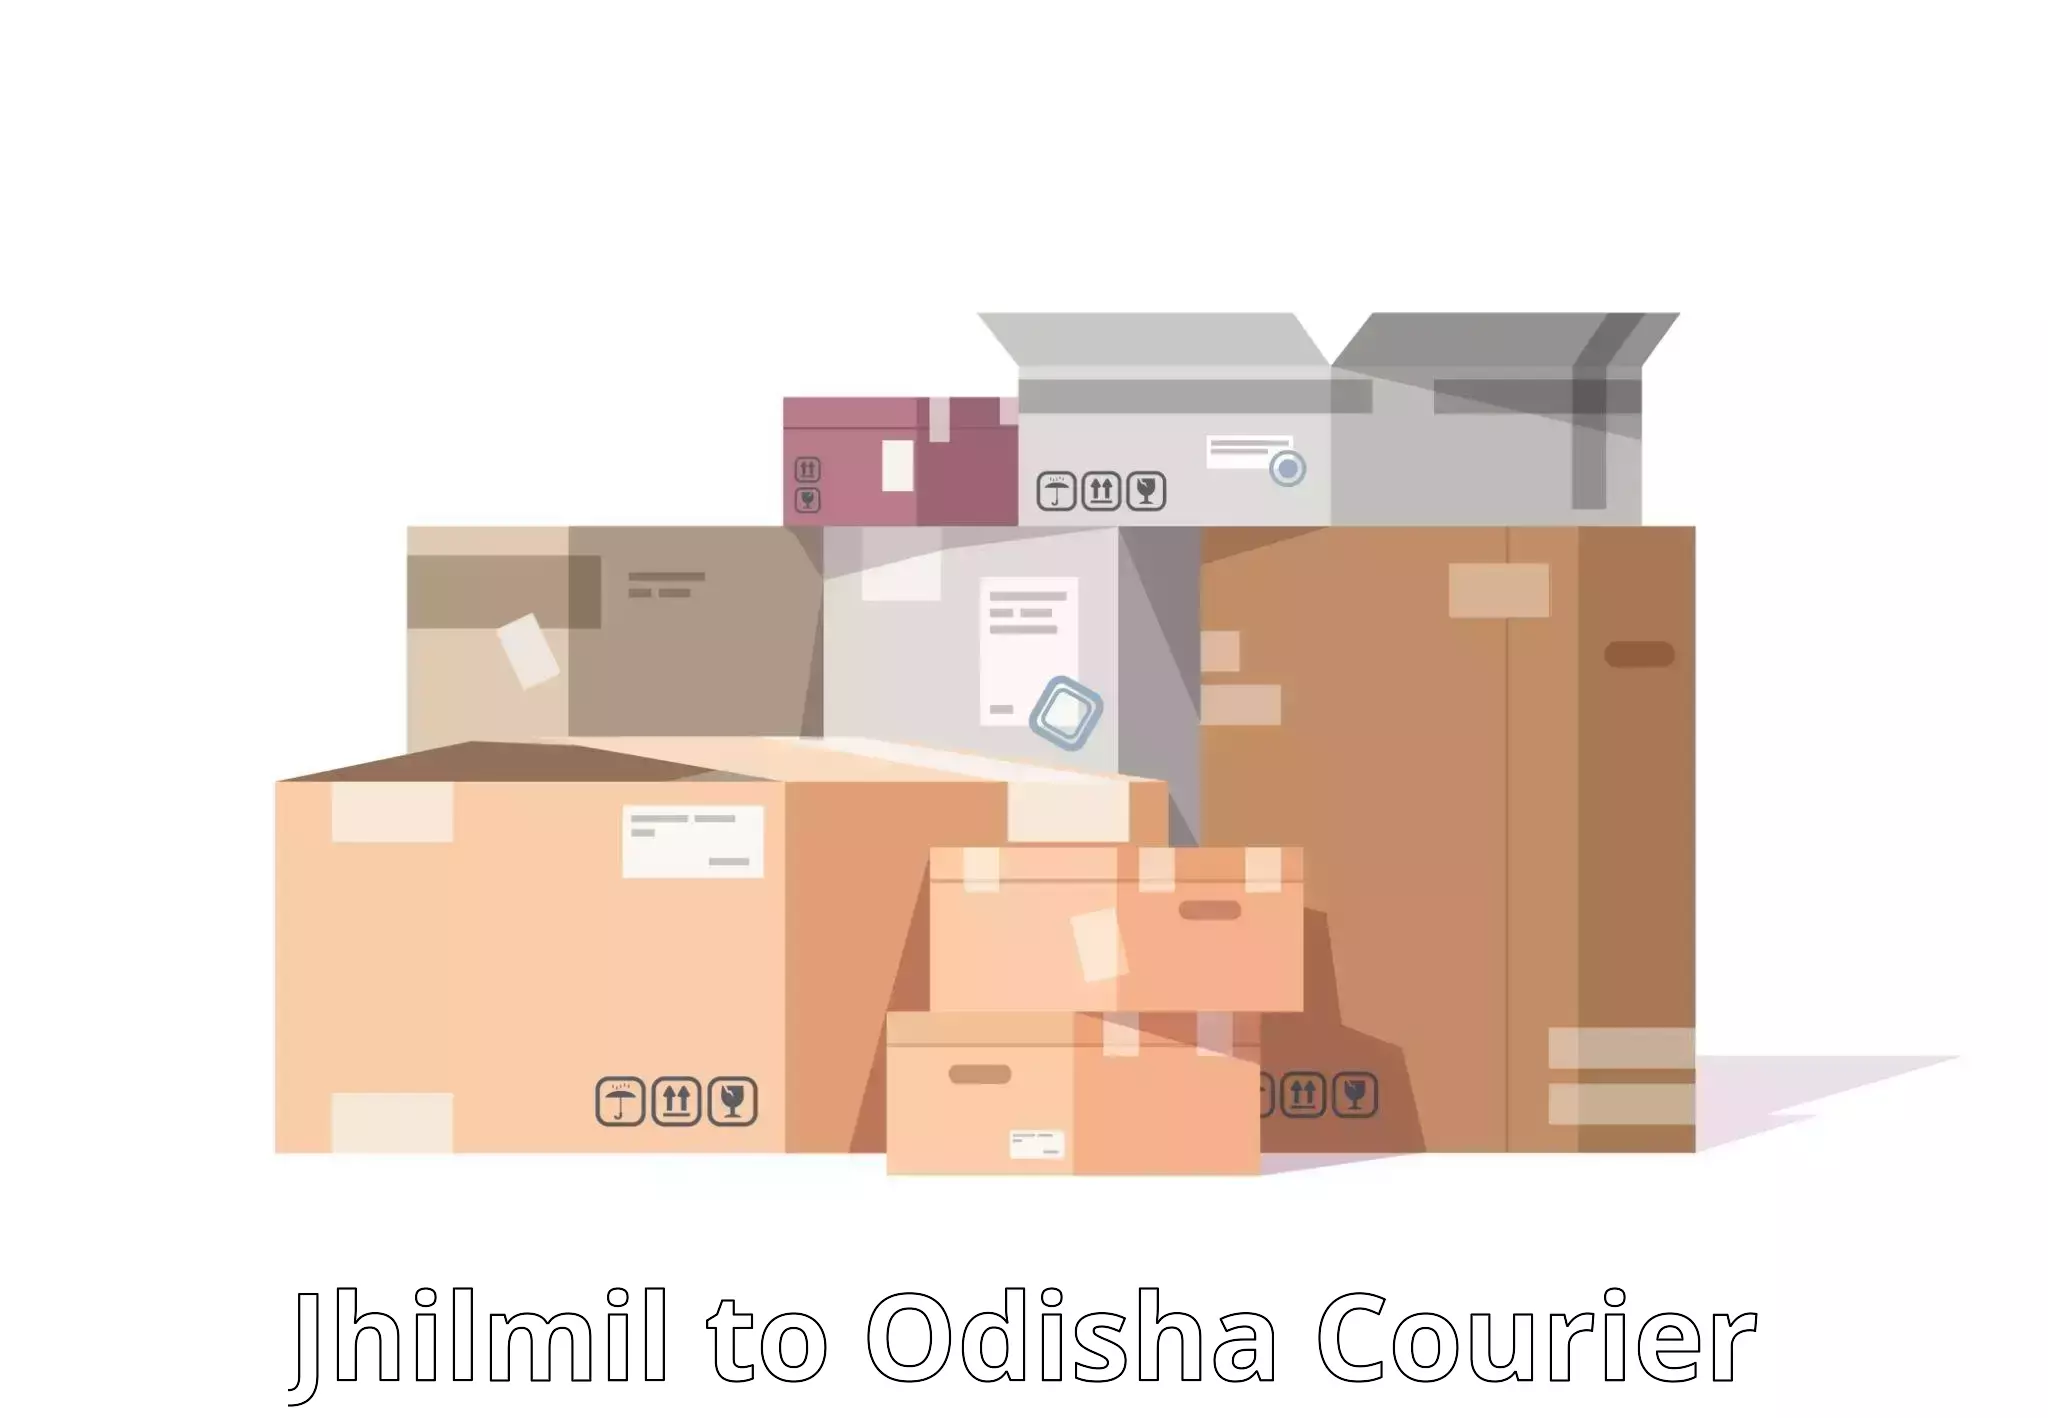 24-hour delivery options Jhilmil to Bhubaneswar